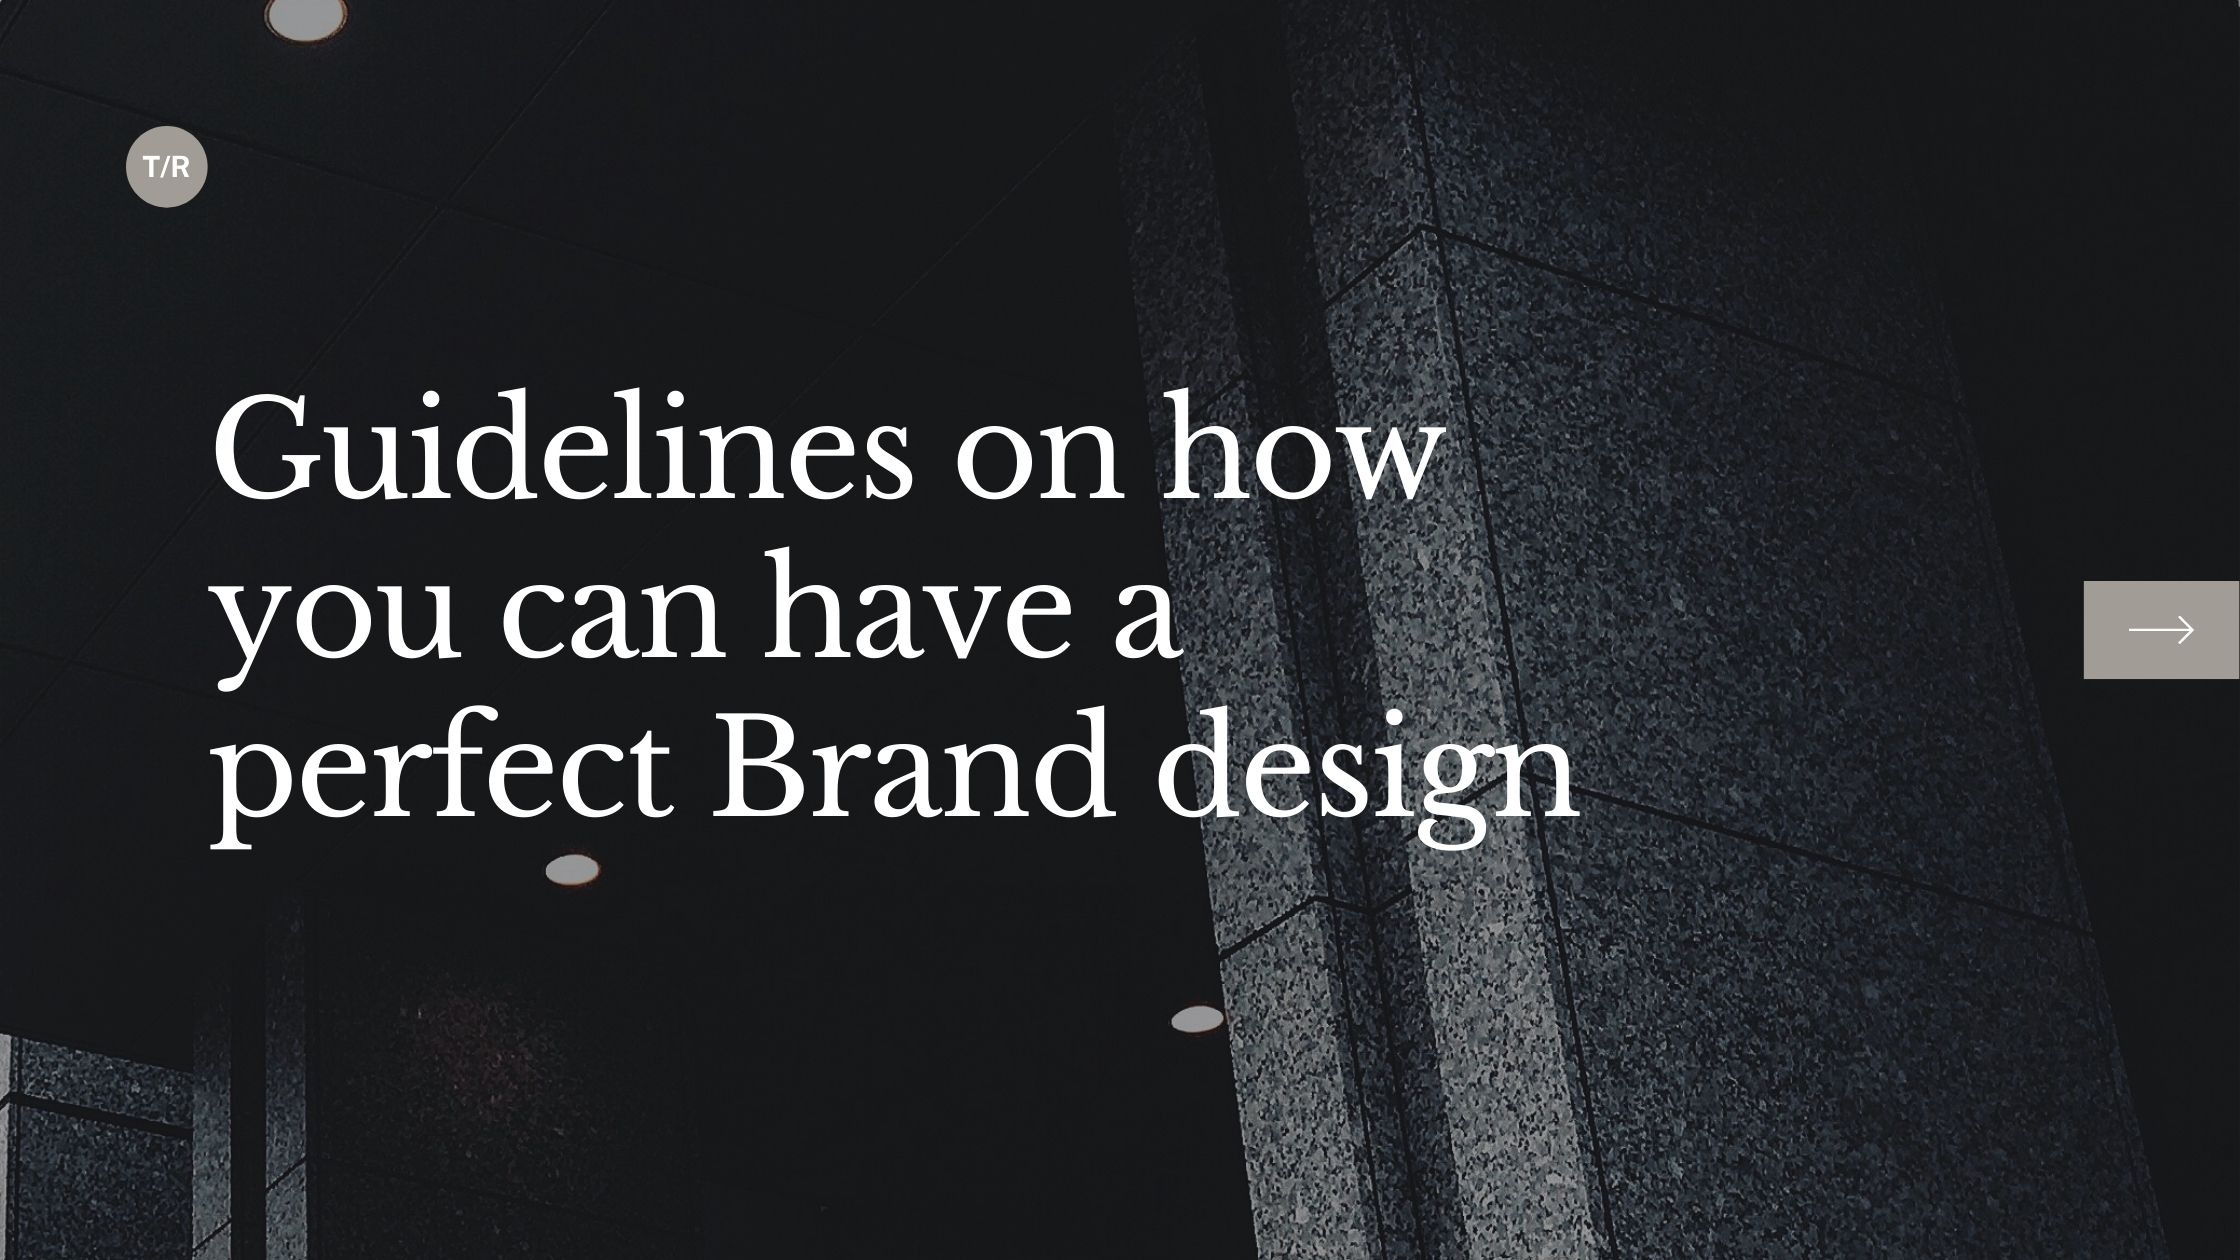 Guidelines on how you can have a perfect Brand design